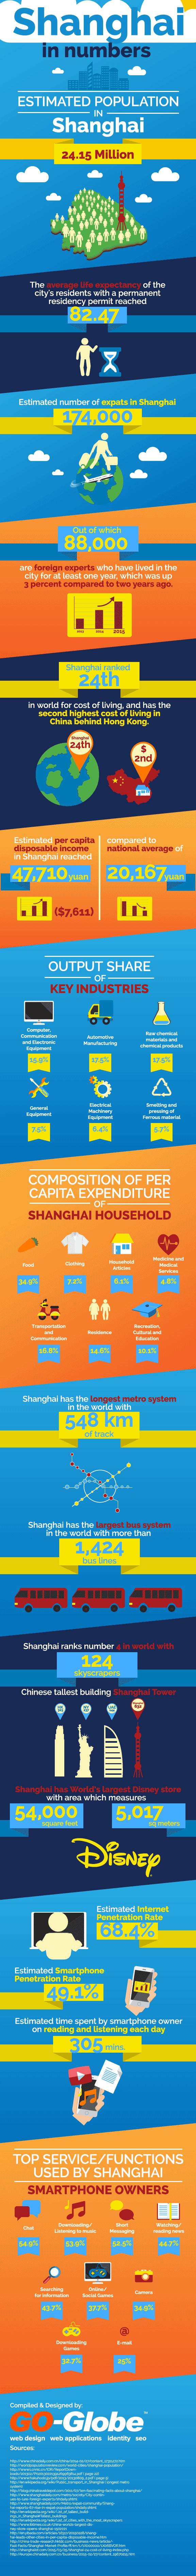 Shanghai in Numbers Infographic